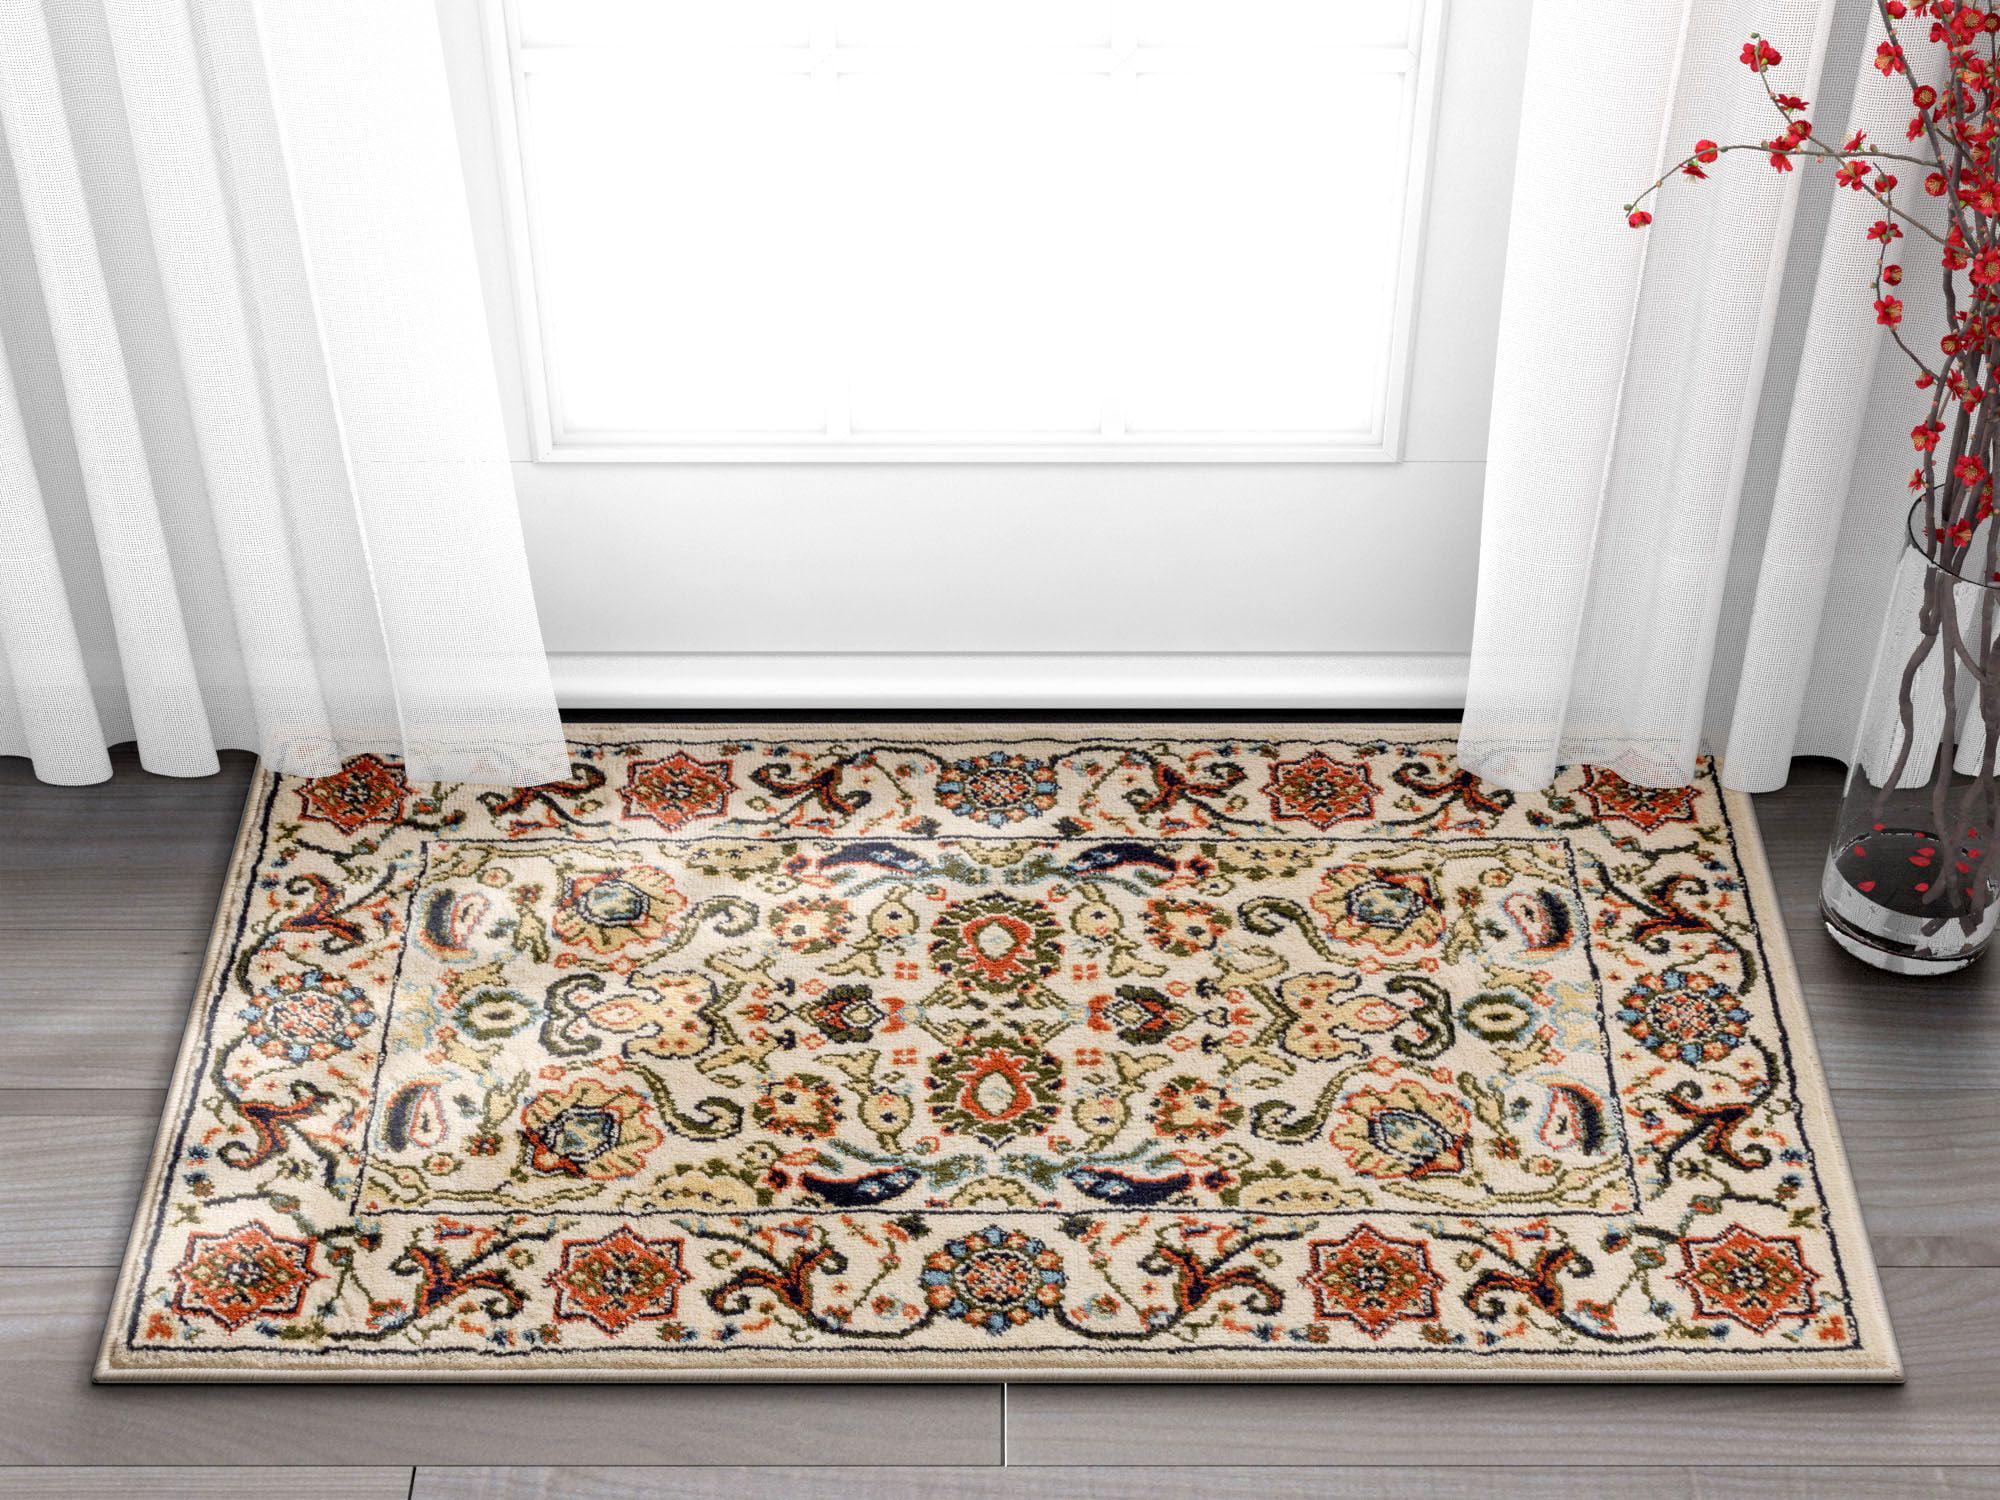 Allison - 3x4 Area Rug - The Rug Mine - Free Shipping Worldwide - Authentic  Oriental Rugs